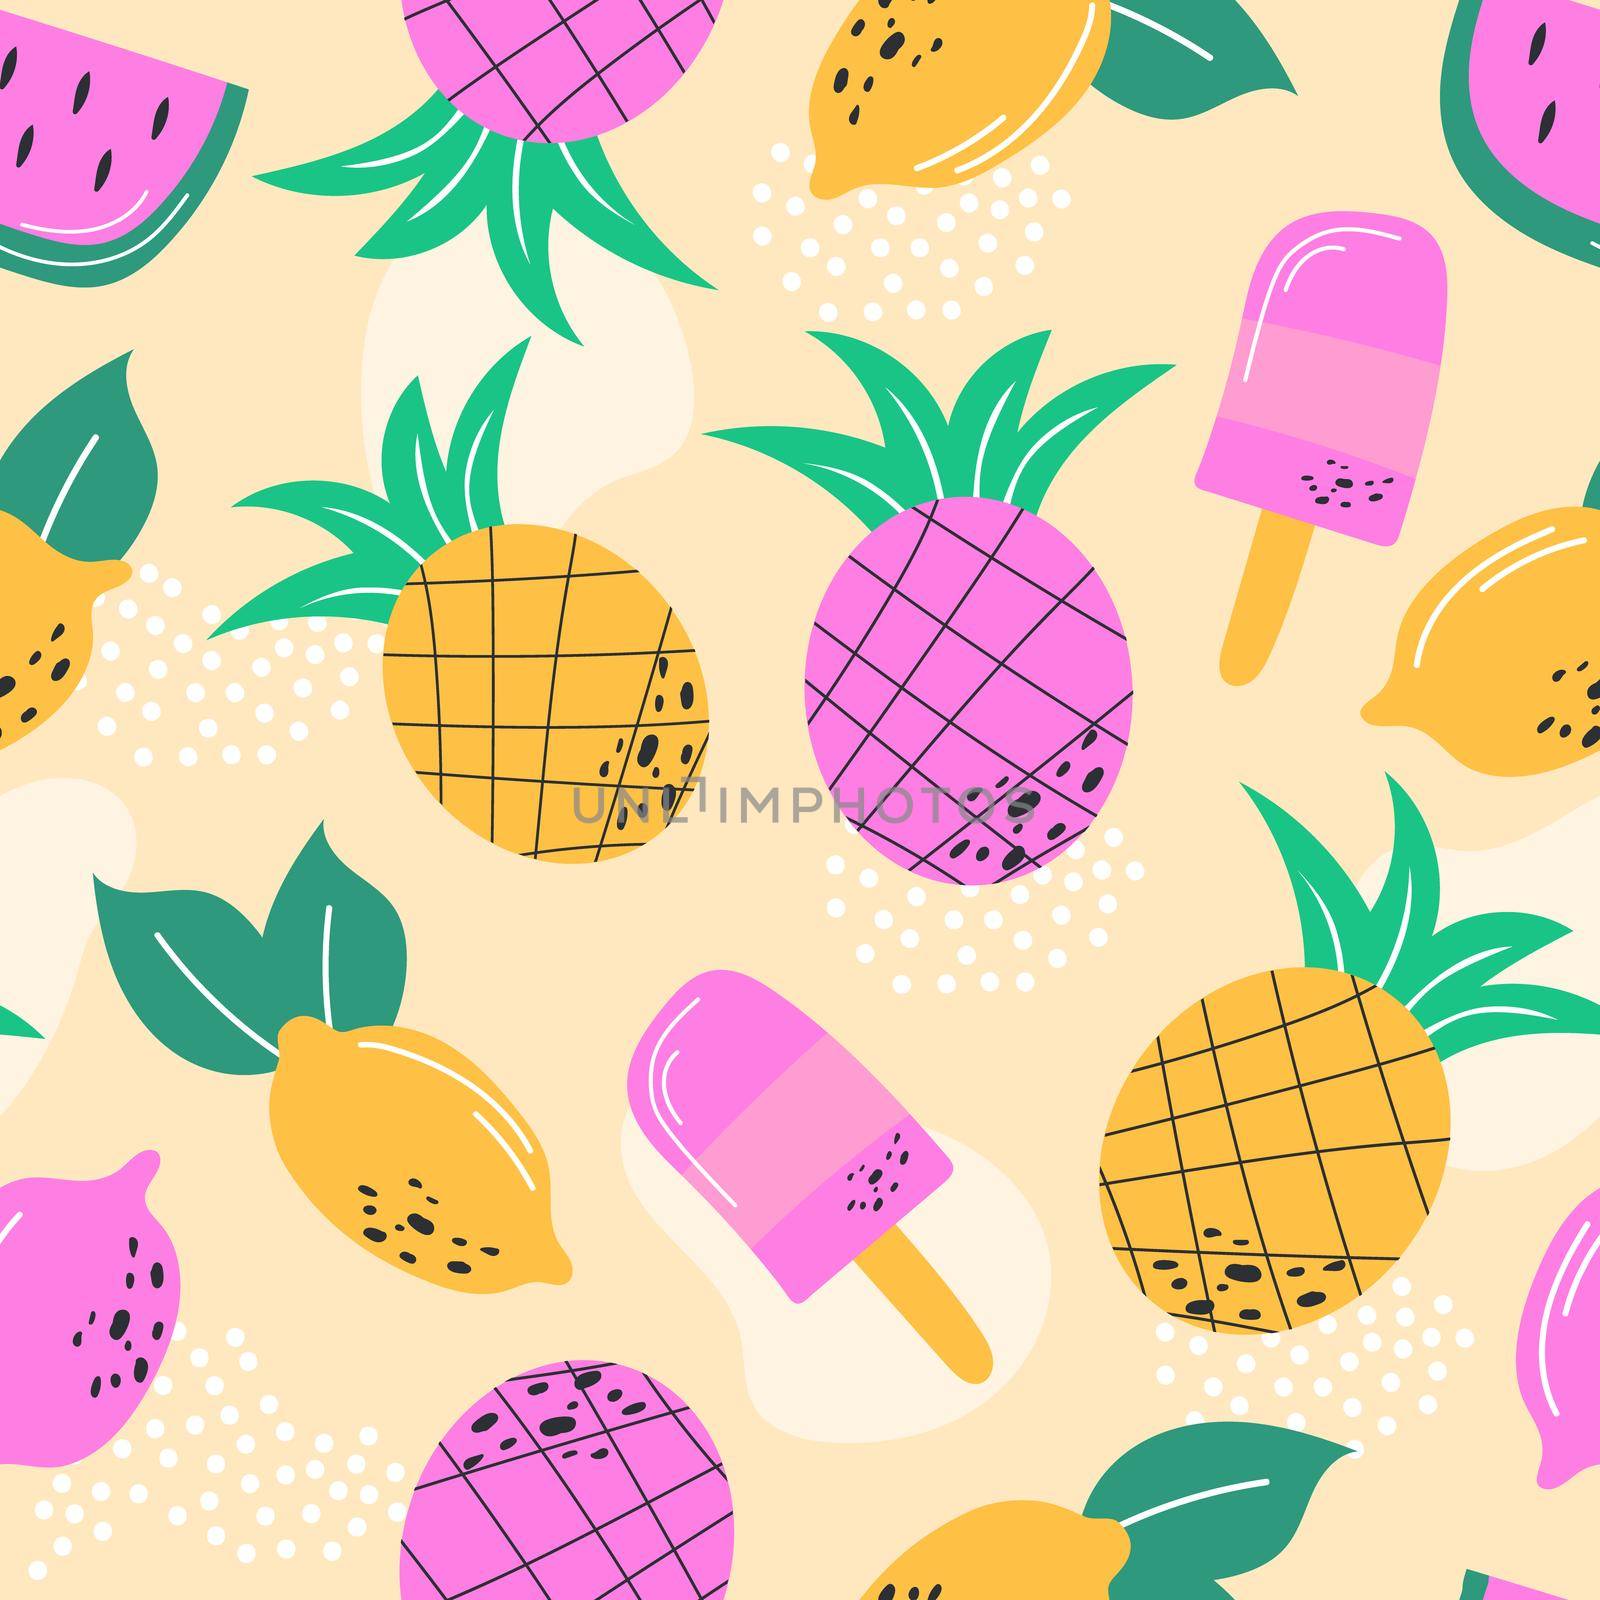 Multicoloured summer fruits seamless pattern for wallpaper, wrapping and textile. Repeat fabric for clothes, bags. Lemon, ice cream, pineapple